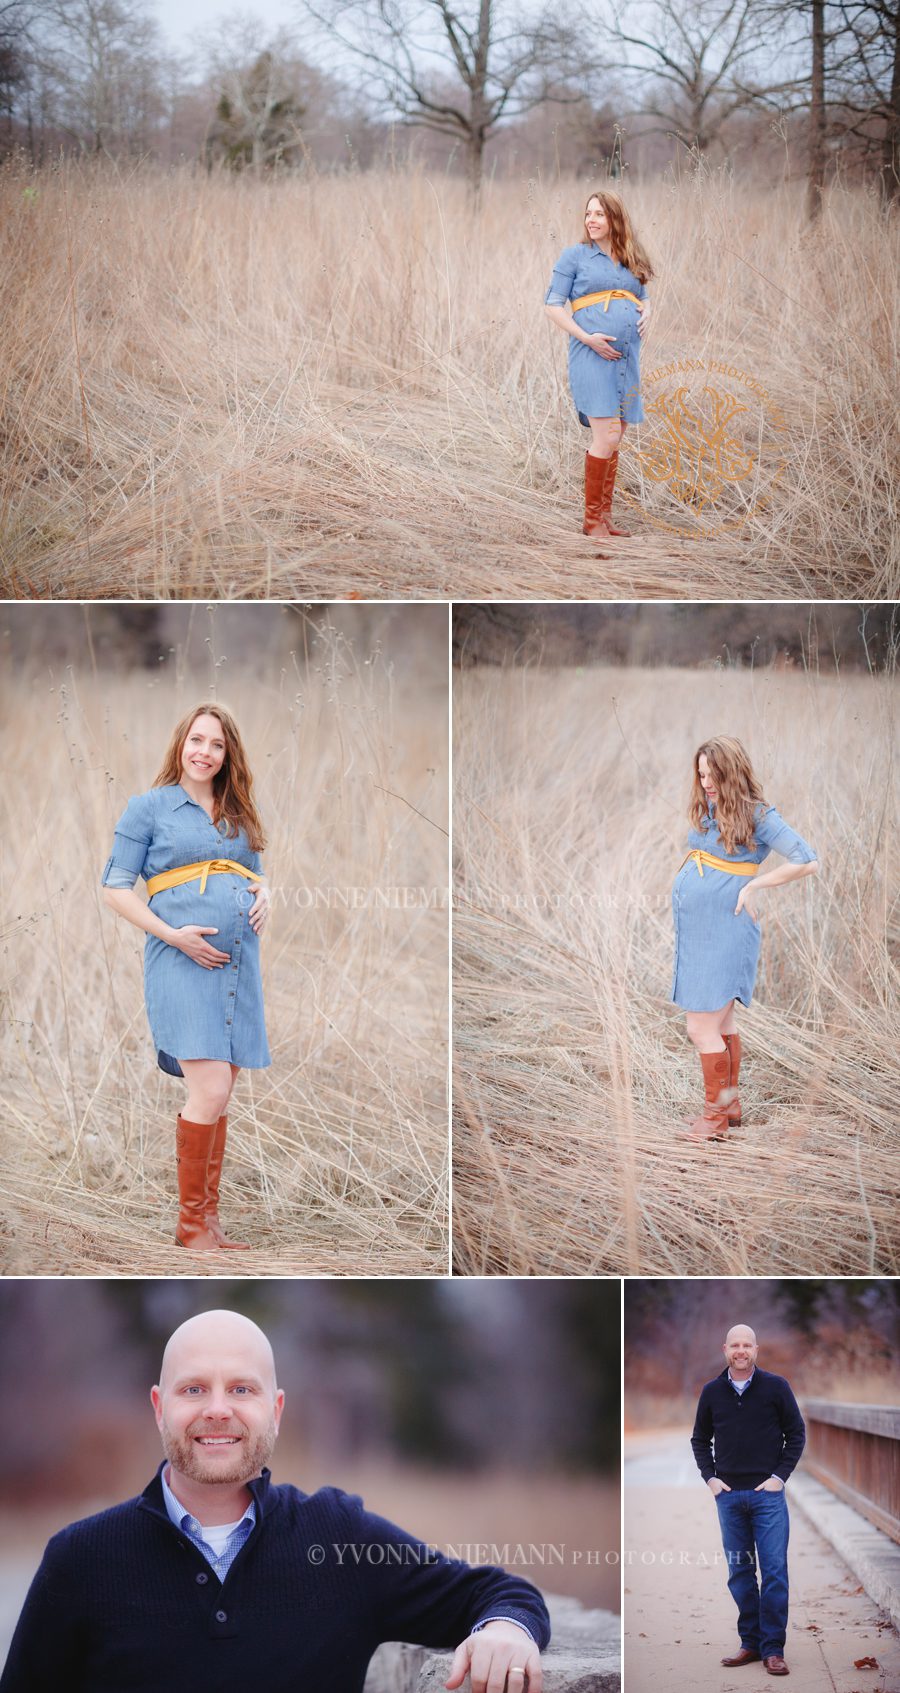 Natural outdoor maternity photography taken by Oconee County, GA maternity photographer, Yvonne Niemann Photography.